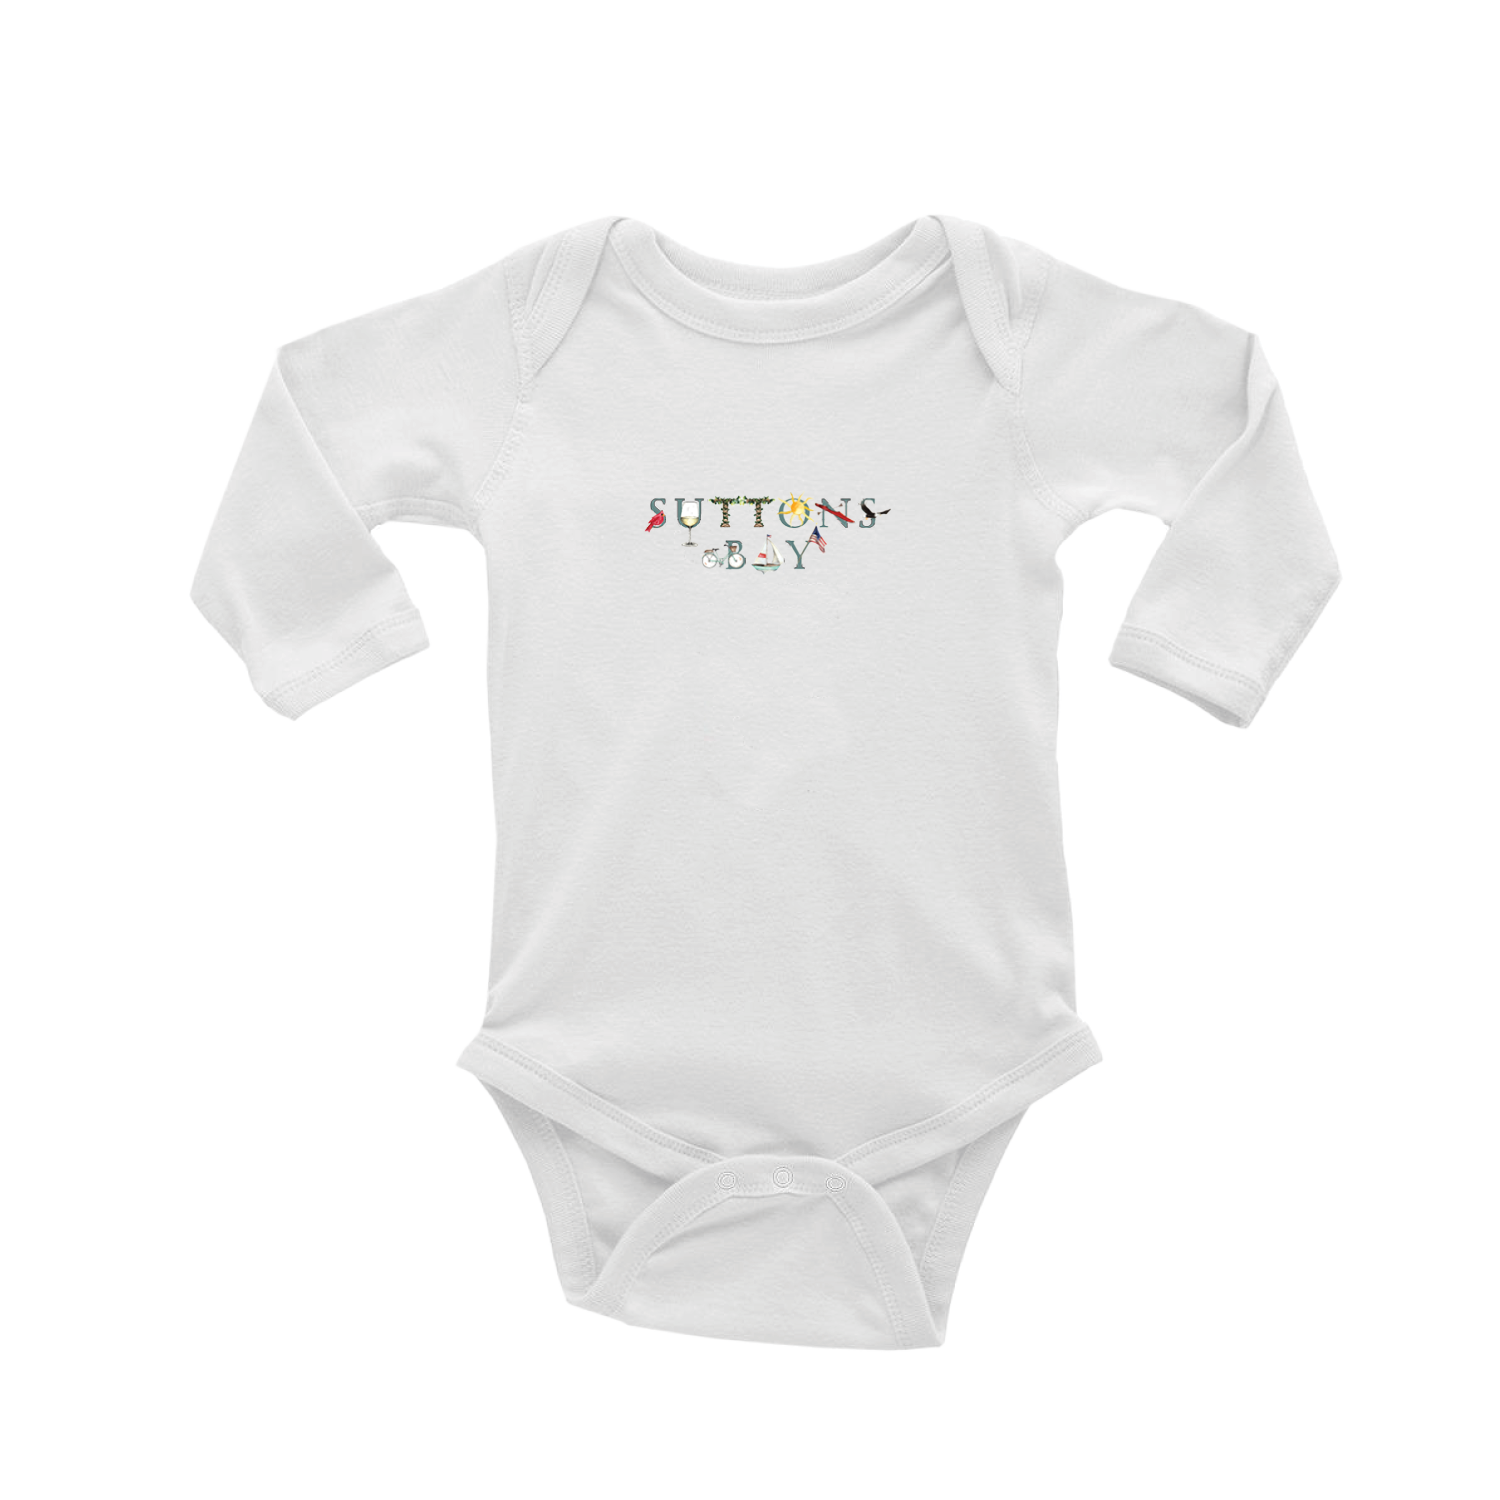 Suttons Bay baby snap up long sleeve